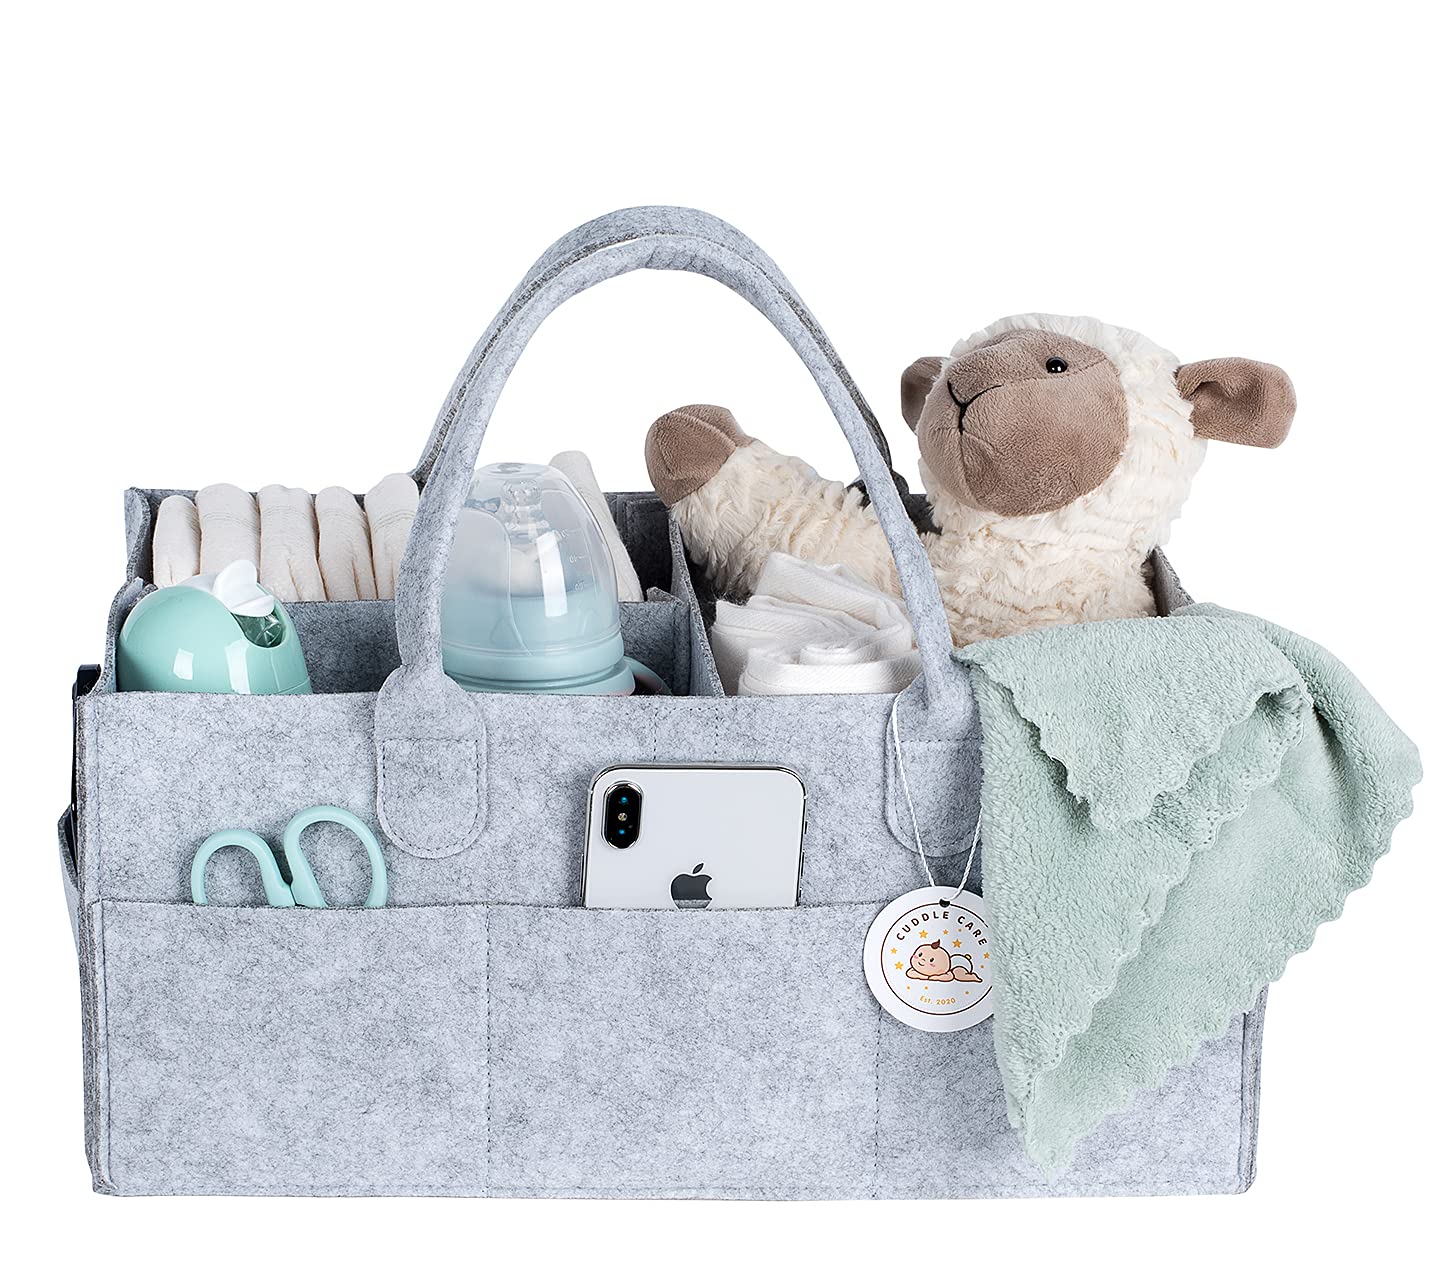 Nappy Caddy Organiser Nursery Storage with Baby Towel, UK Company, Grey Basket with Detachable Divider, Diaper Bag, Baby Accessories, Newborn Gifts for Mom